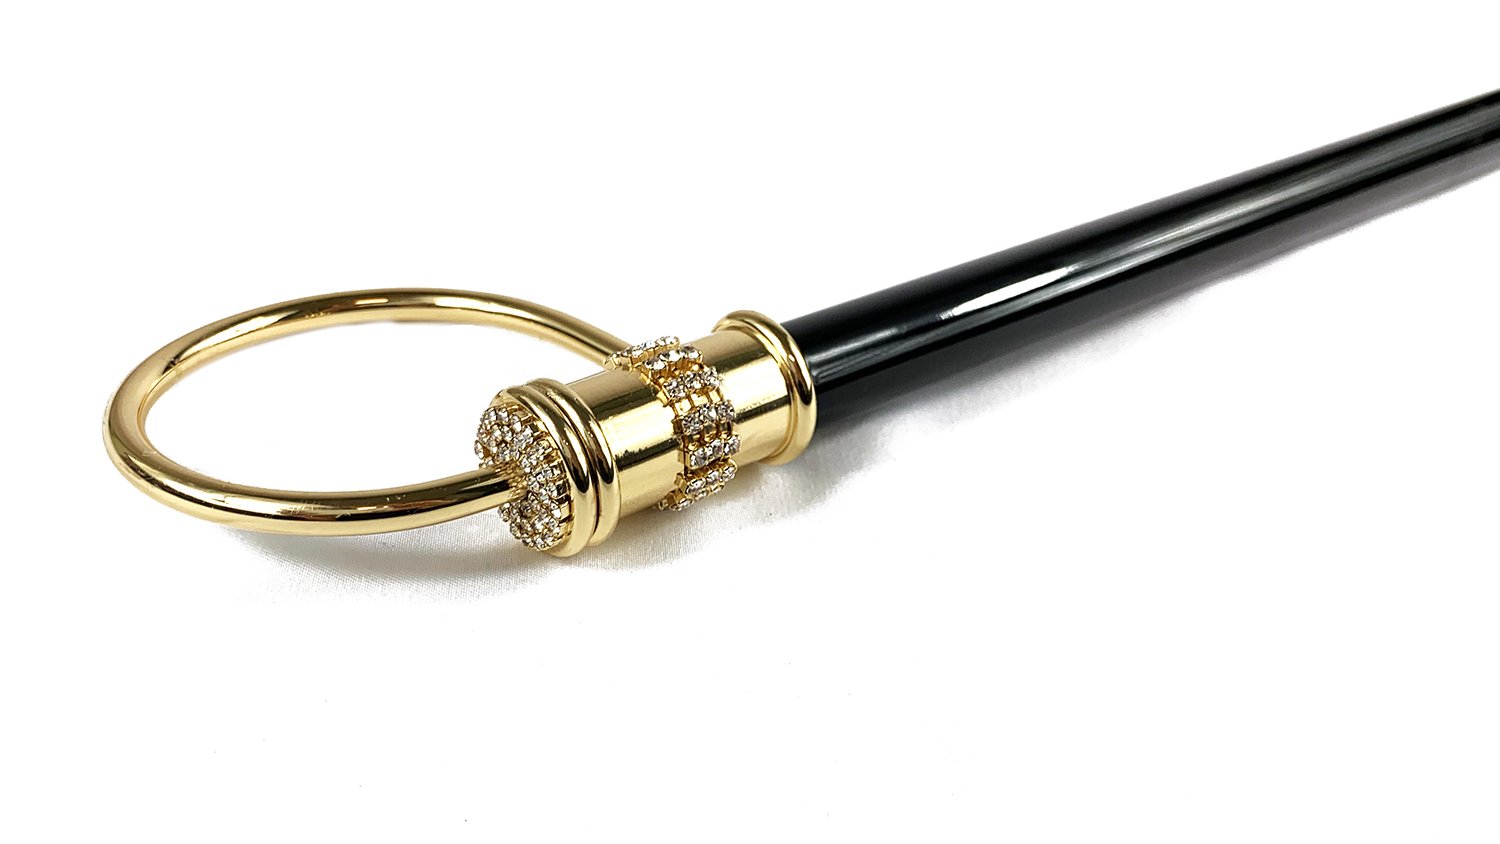 Original collectible Walking stick with crystals - IL MARCHESATO LUXURY UMBRELLAS, CANES AND SHOEHORNS